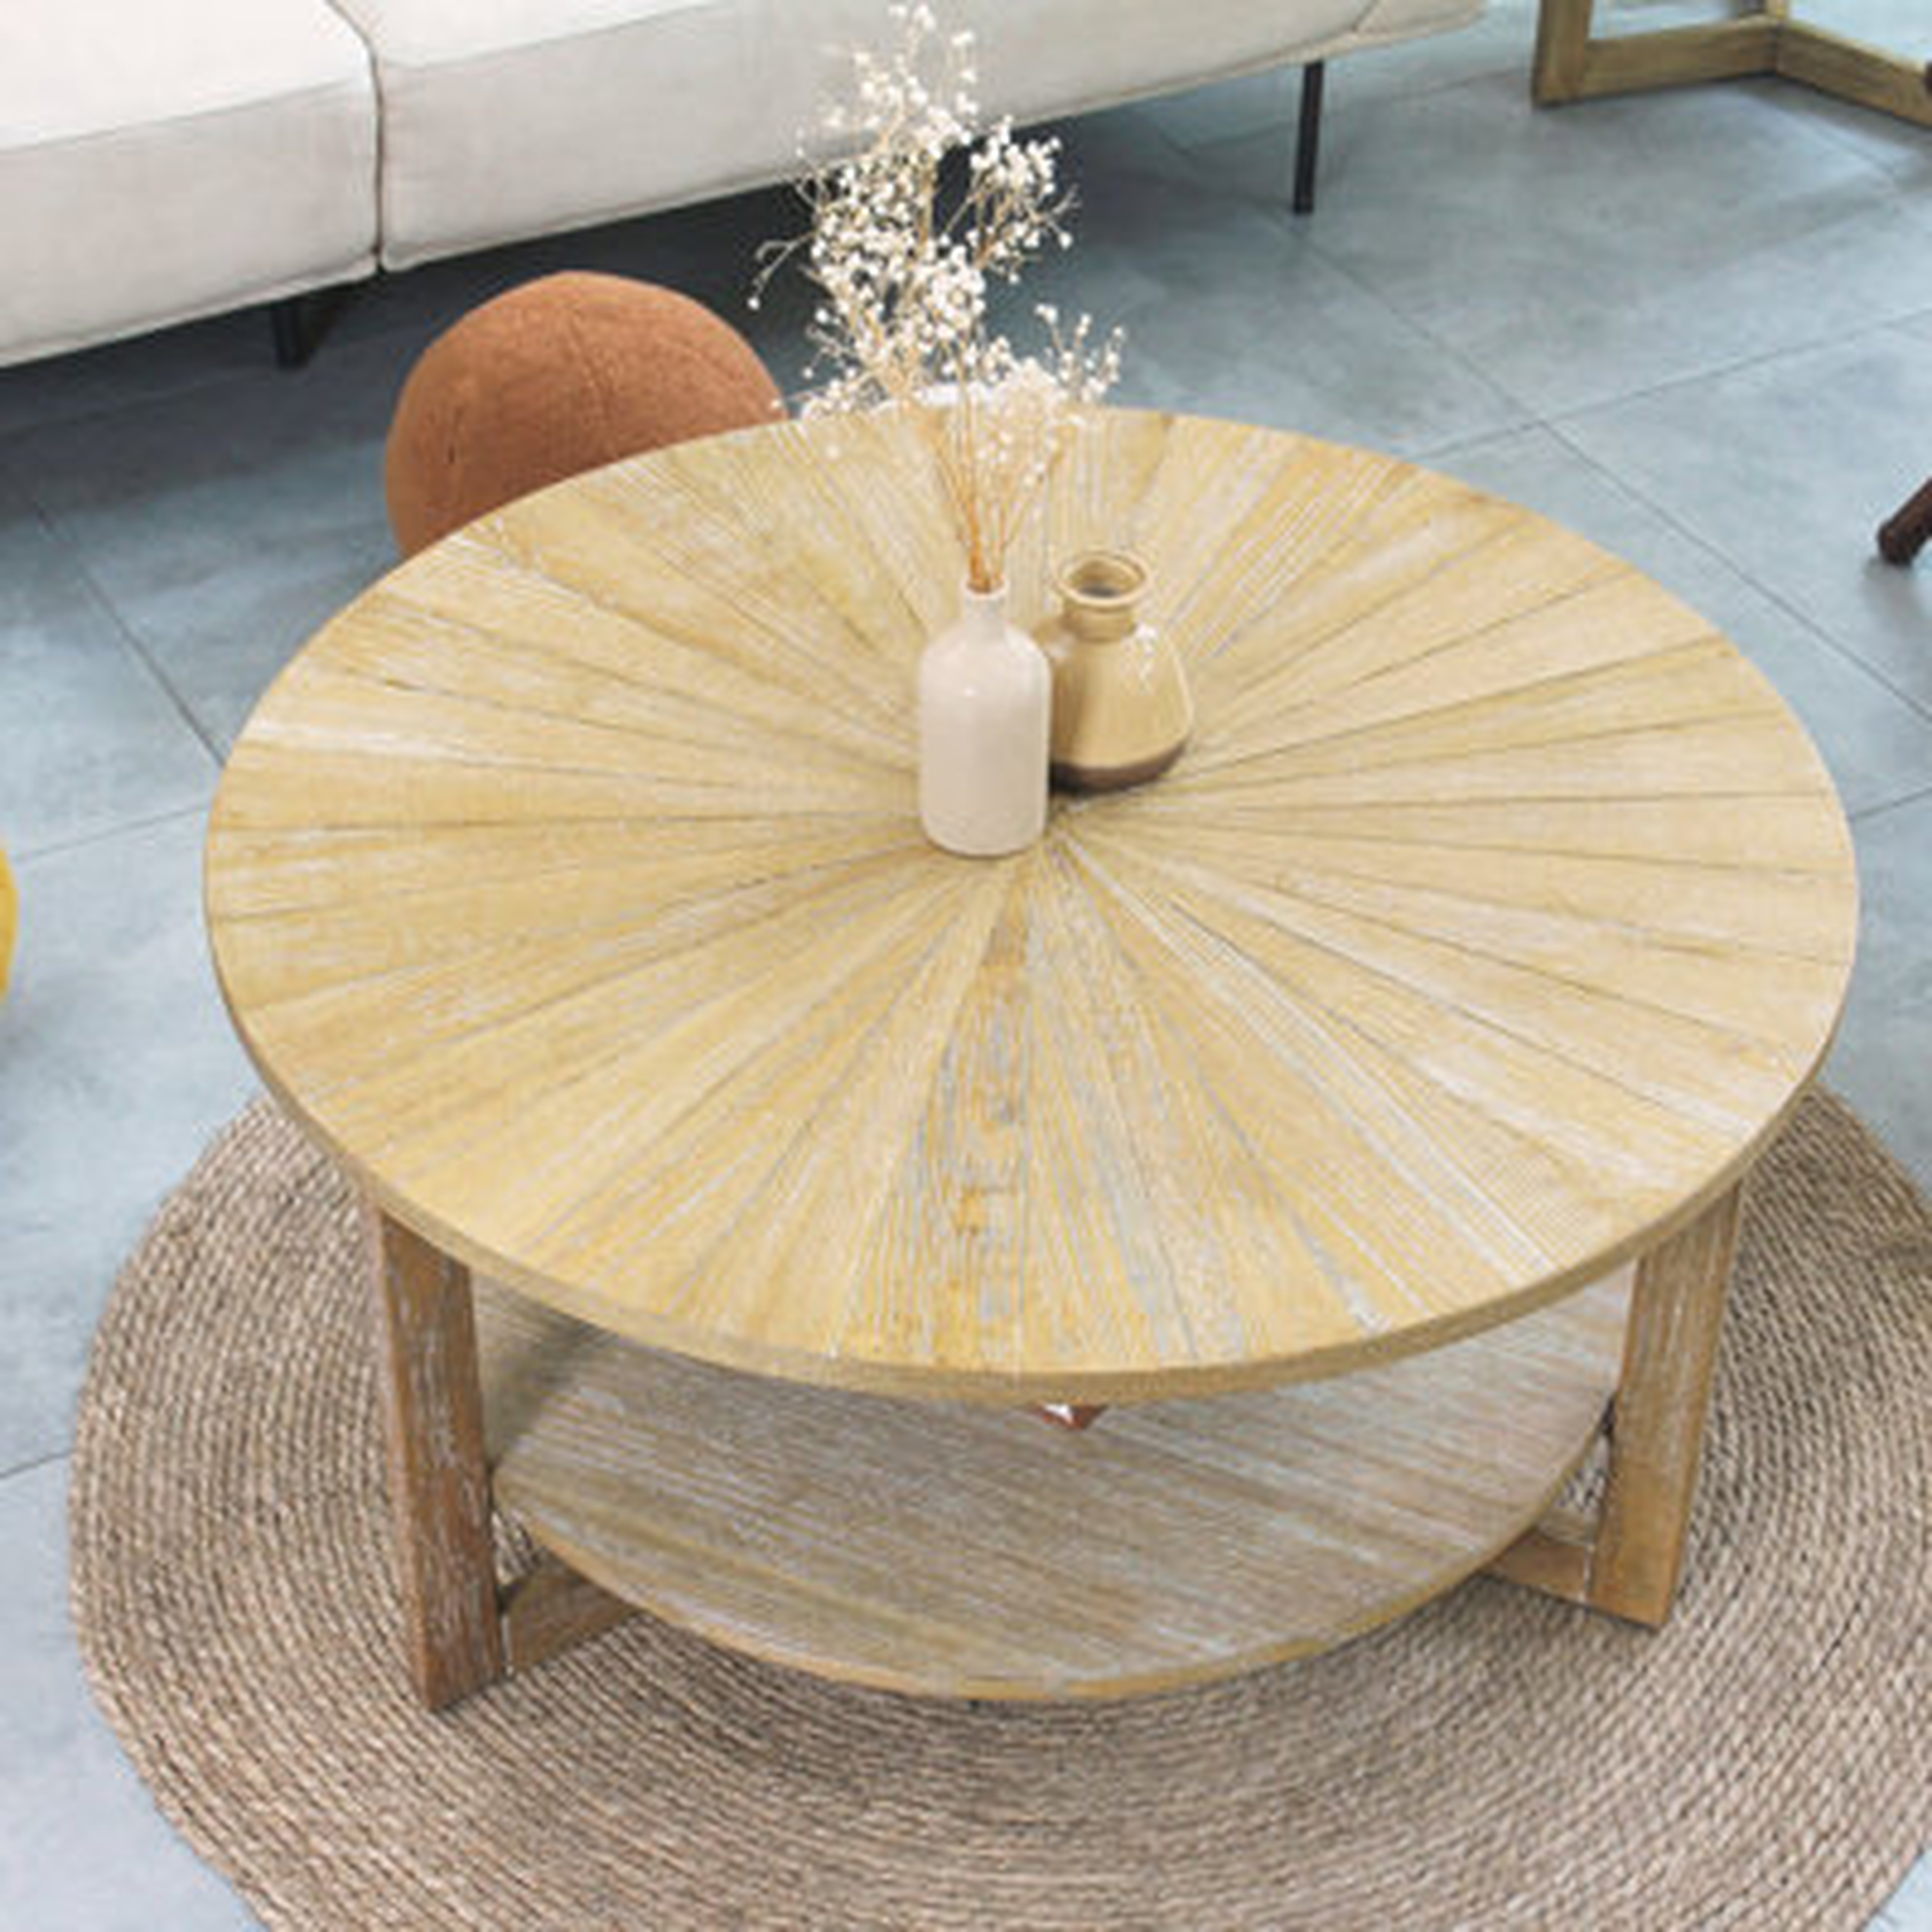 Solid Wood Round Modern Tea Table, Wooden Coffee Table, Round Center Table In The Living Room, Chess And Card Game Table, Oak Table Legs, 35 '''' X 35 '''' X 18 '''', Natural Wood Surface. - Wayfair